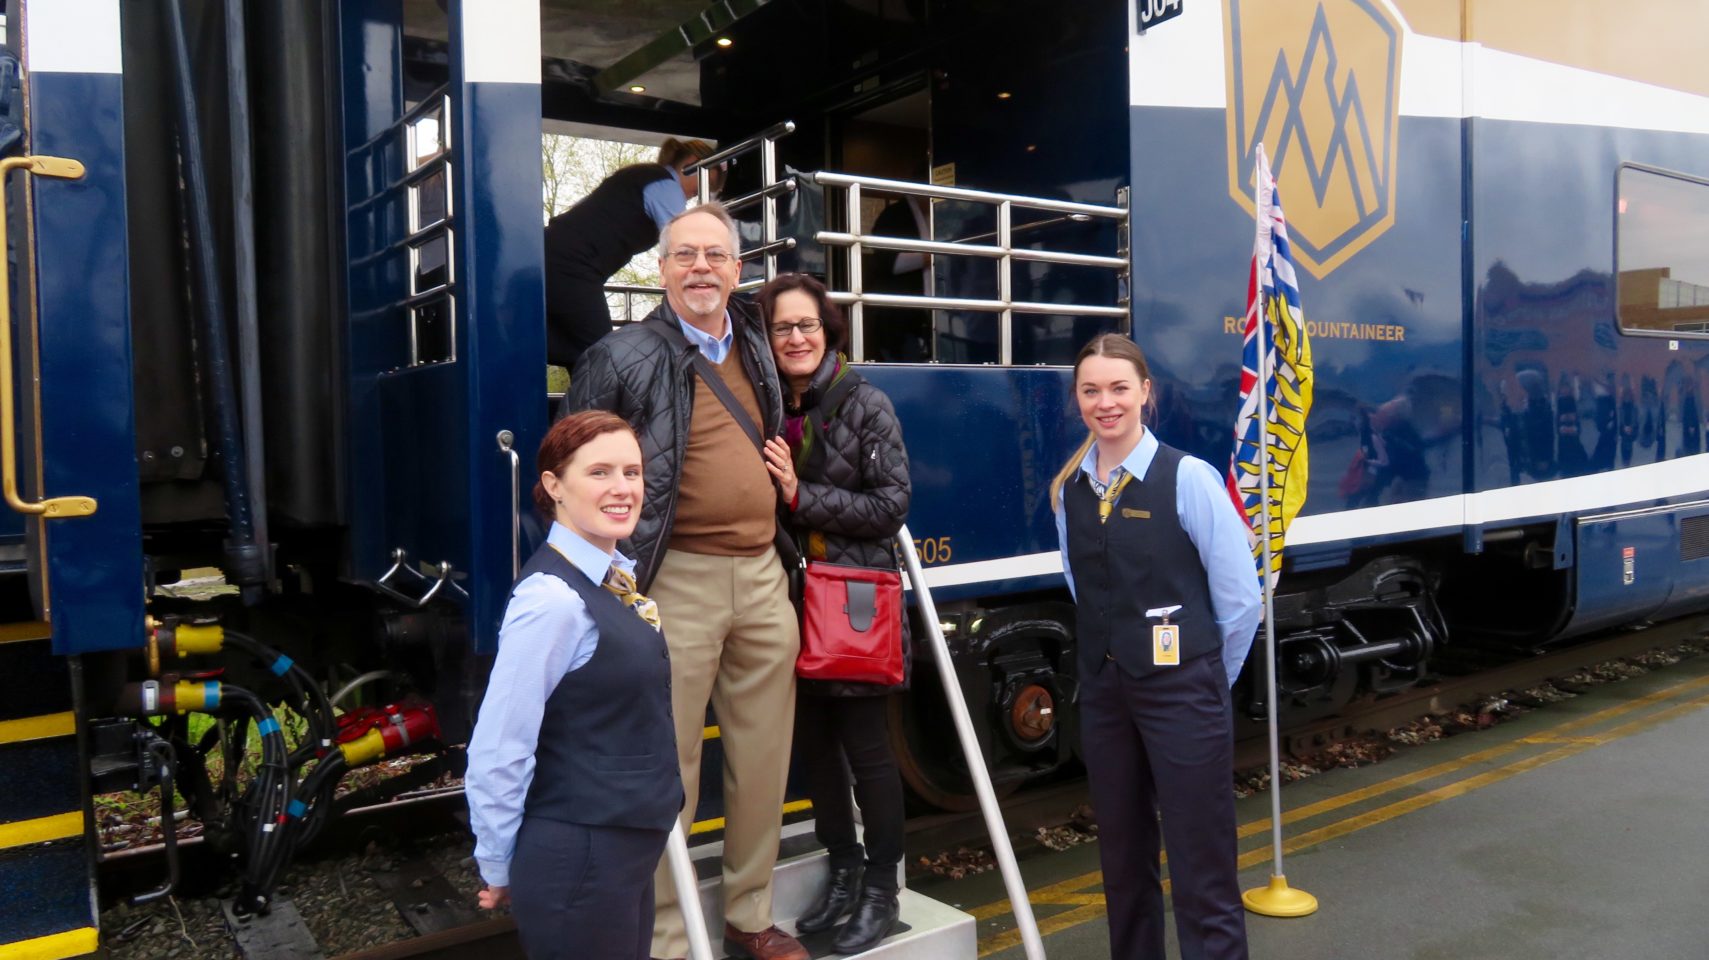 Lynn and Denis boarding RockyMountaineer train in Vancouver, Canada for the Trip of a Lifetime ...